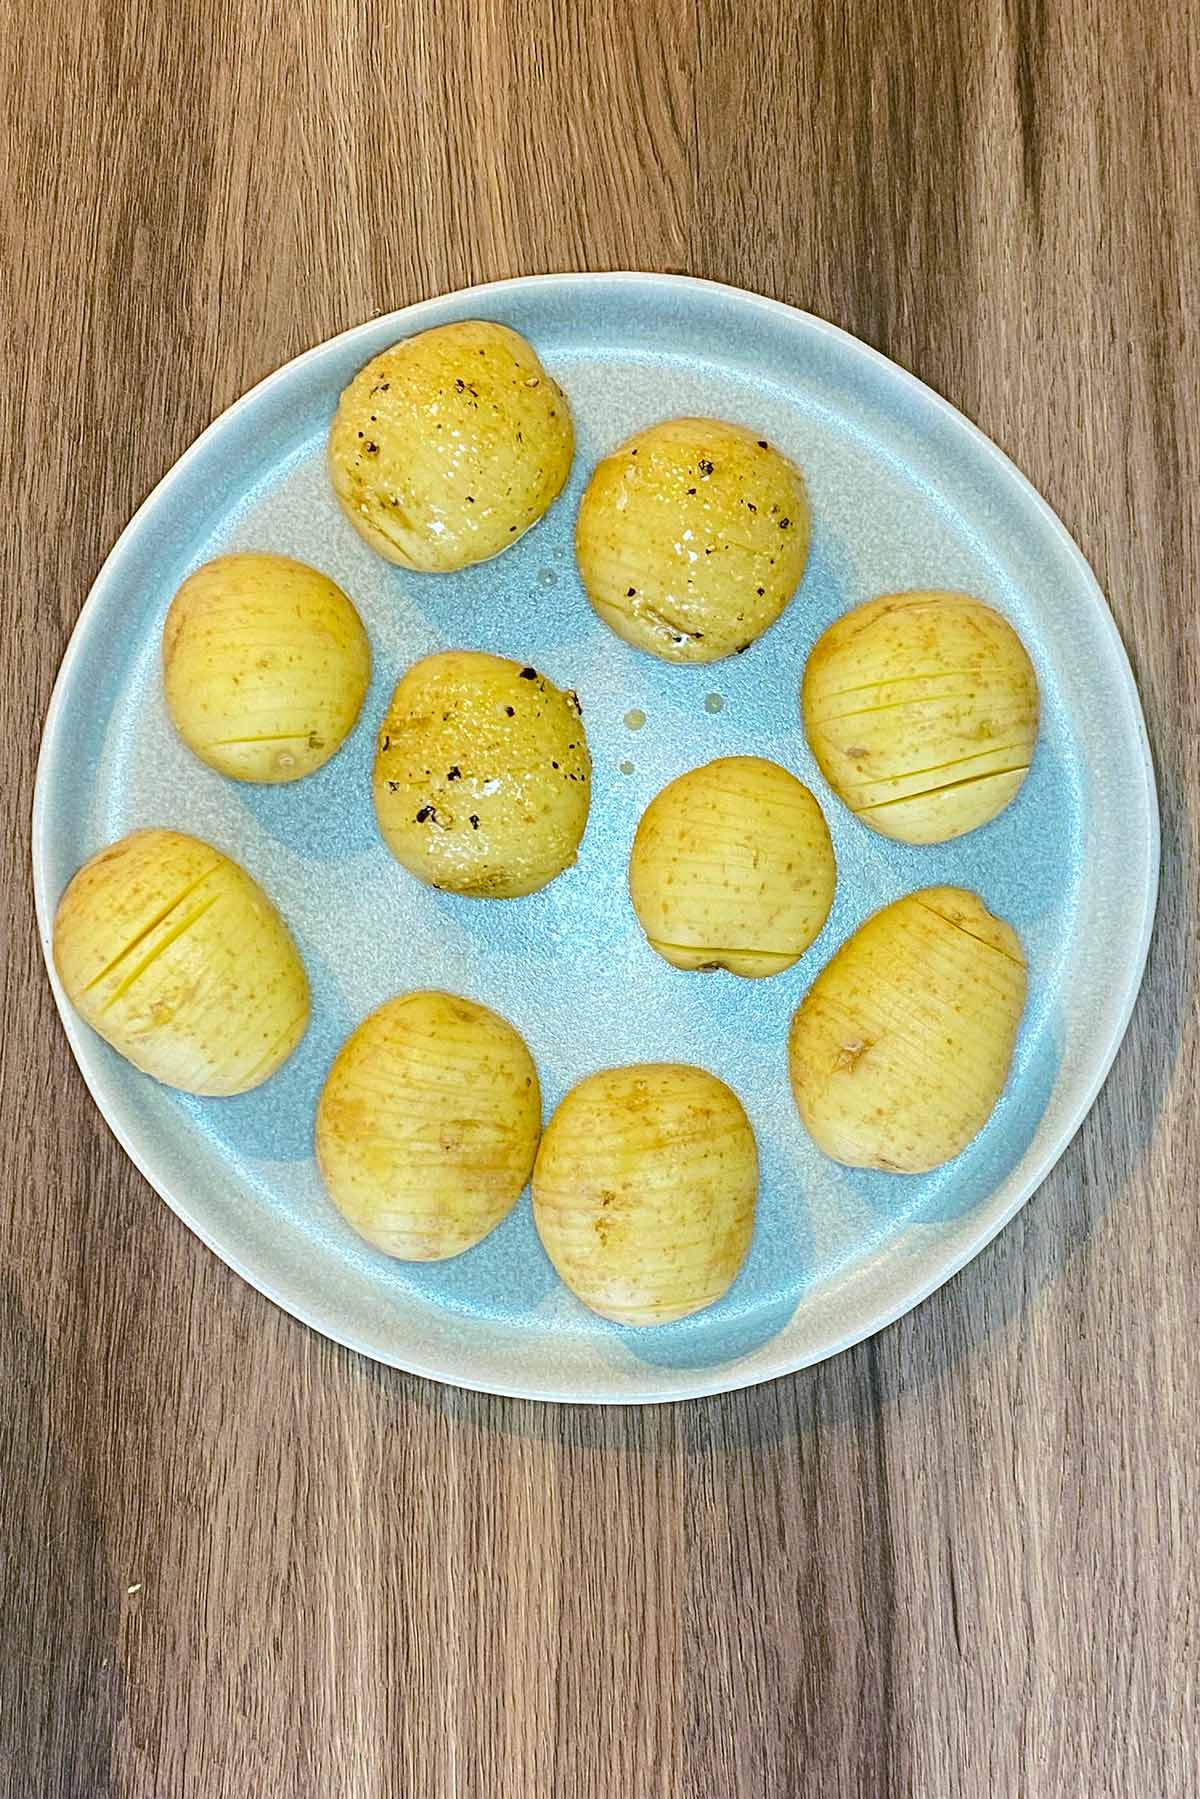 A plate of uncooked hasselback potatoes brushed with oil and seasoning.